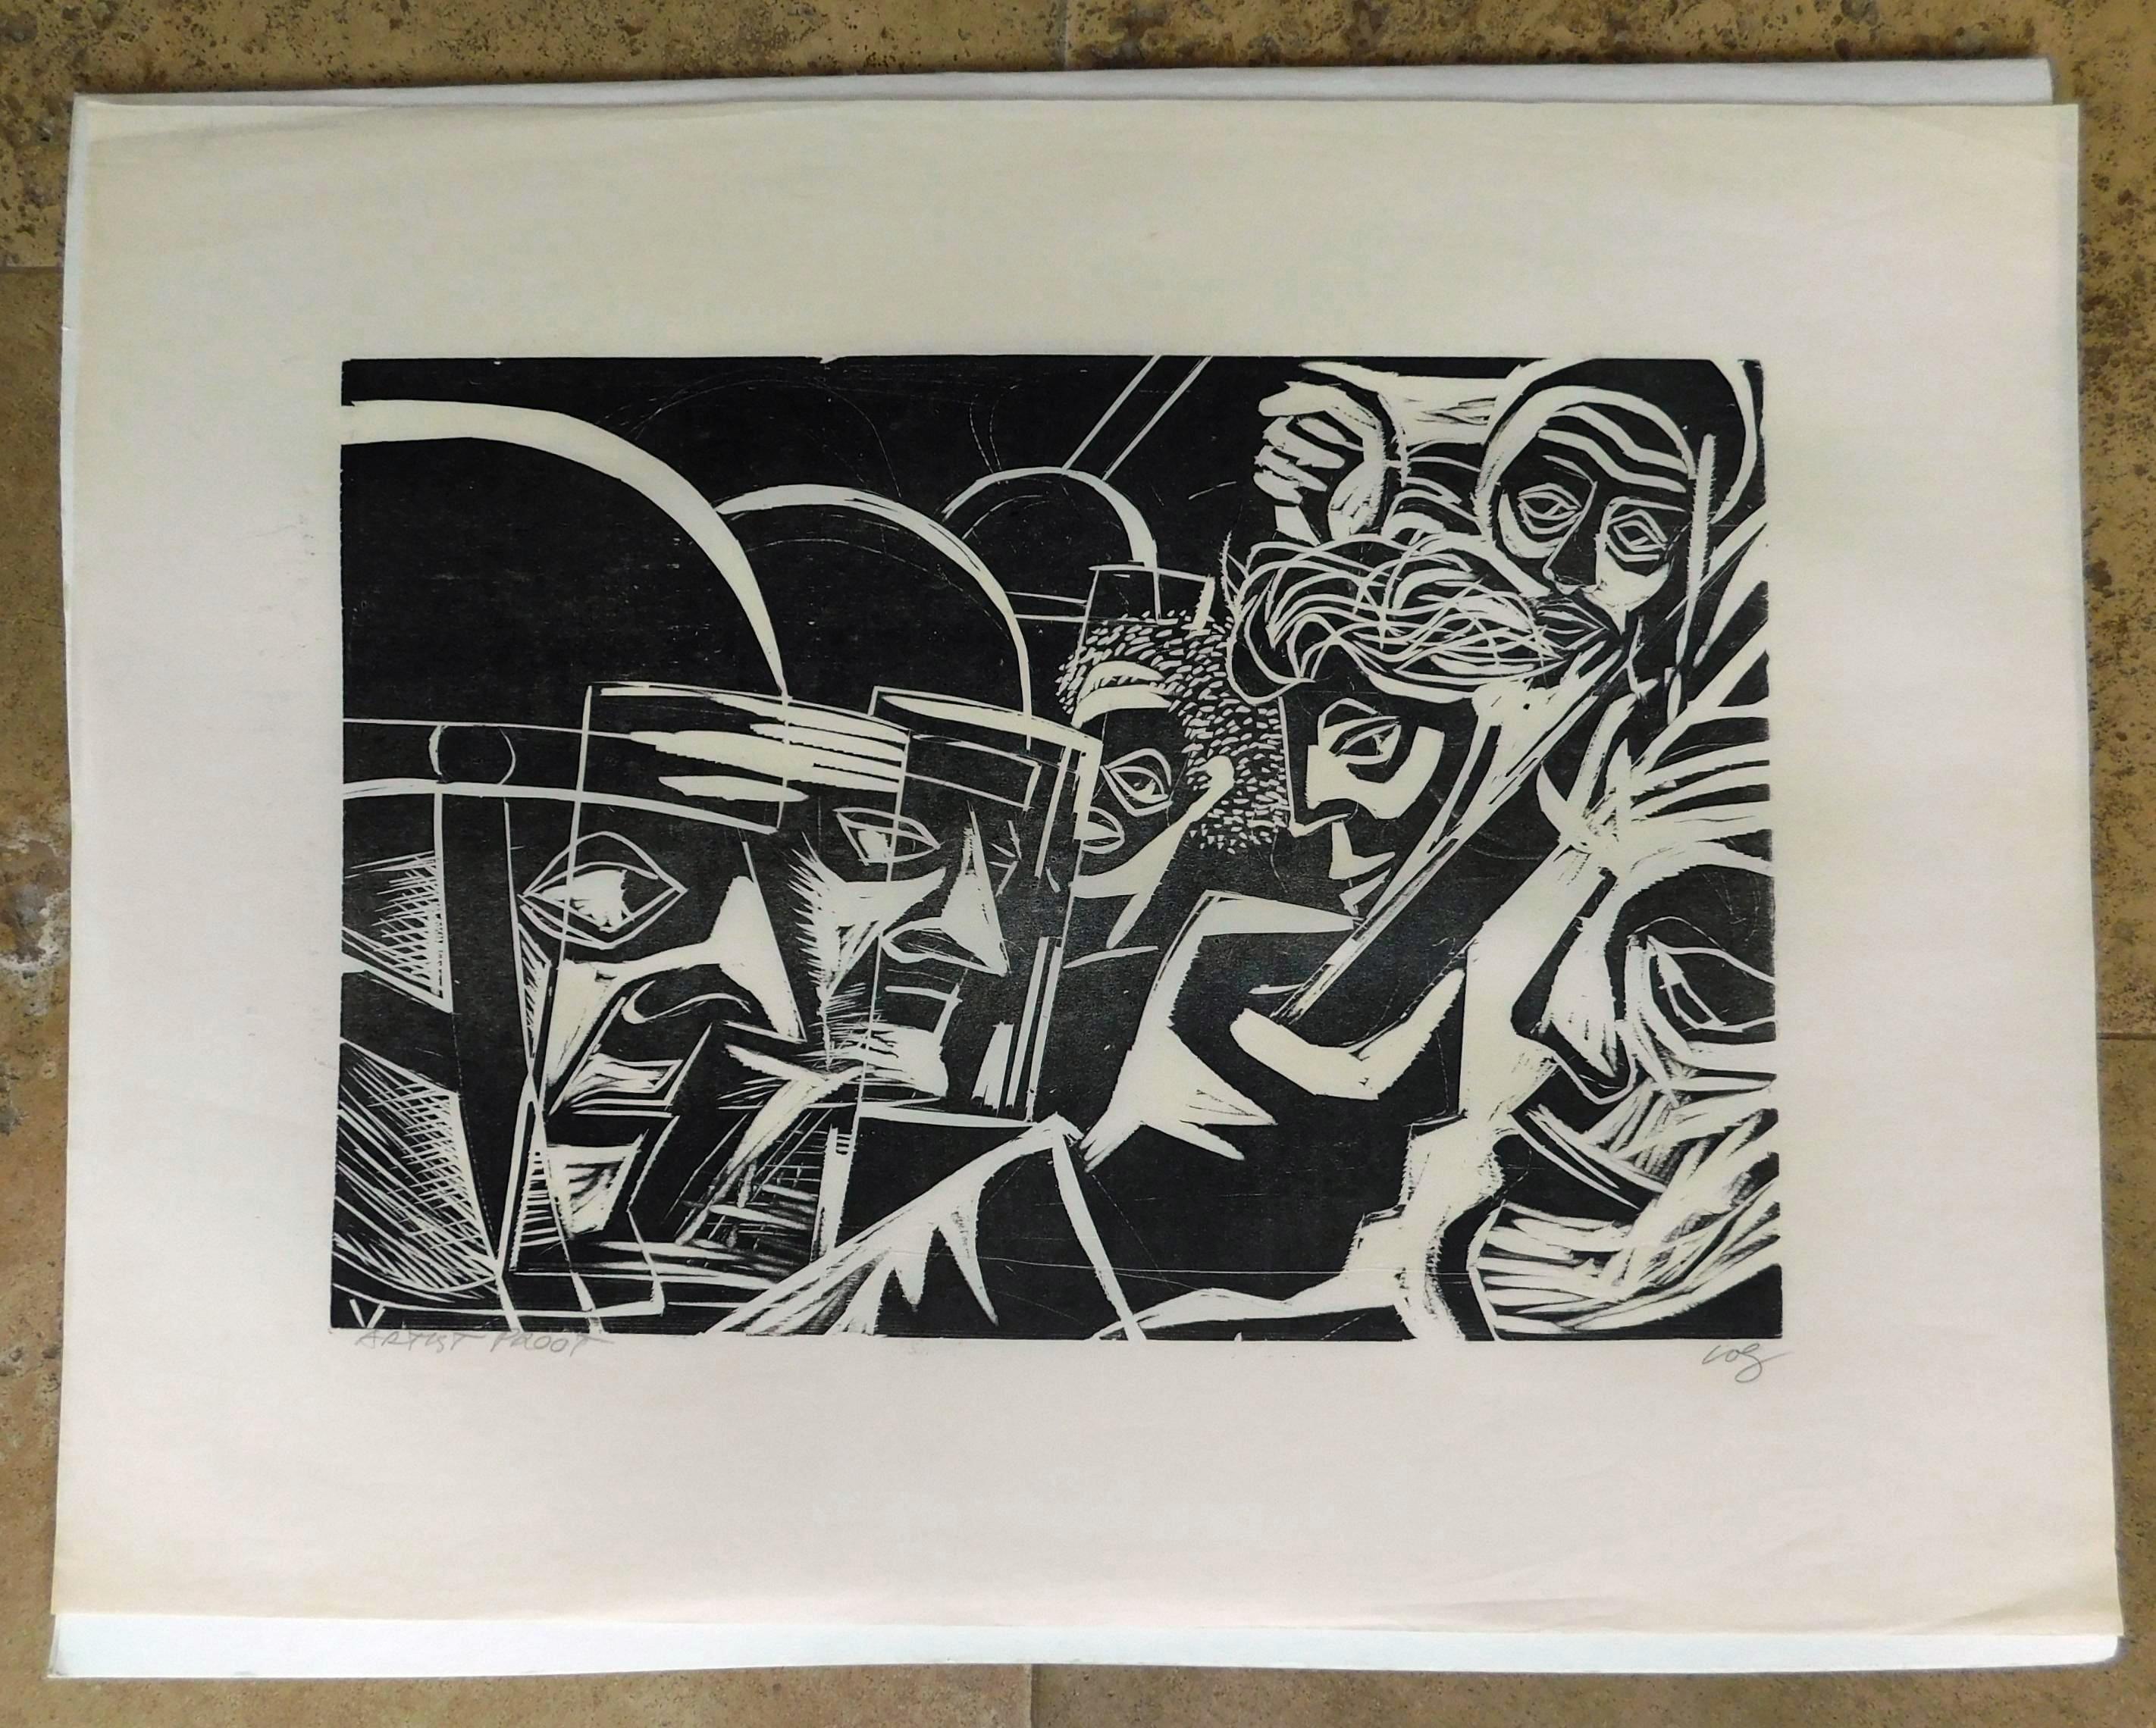 An original woodcut print depicting the social unrest of the 1960s by Herman Roderick Volz. 
Pencil signed by the artist lower right. Image measures 11 1/2